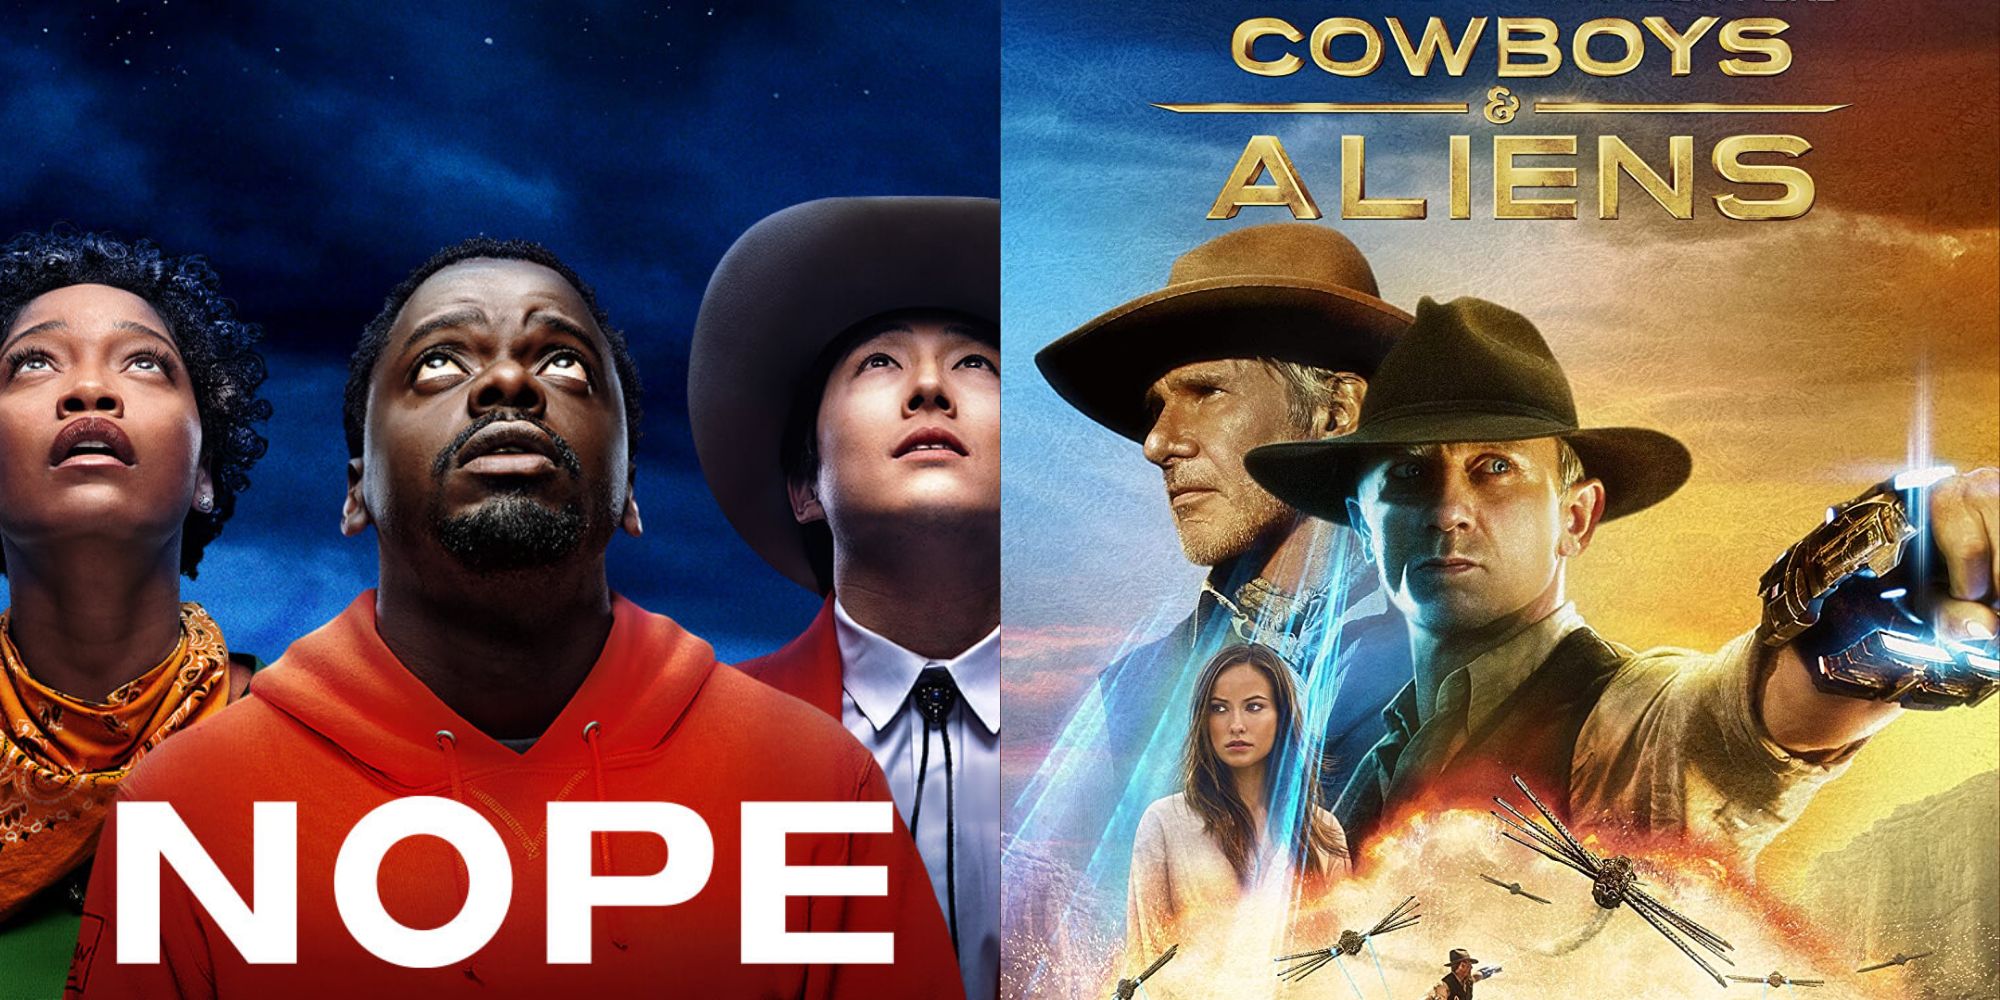 Split image showing posters for Nope and Cowboys and Aliens.